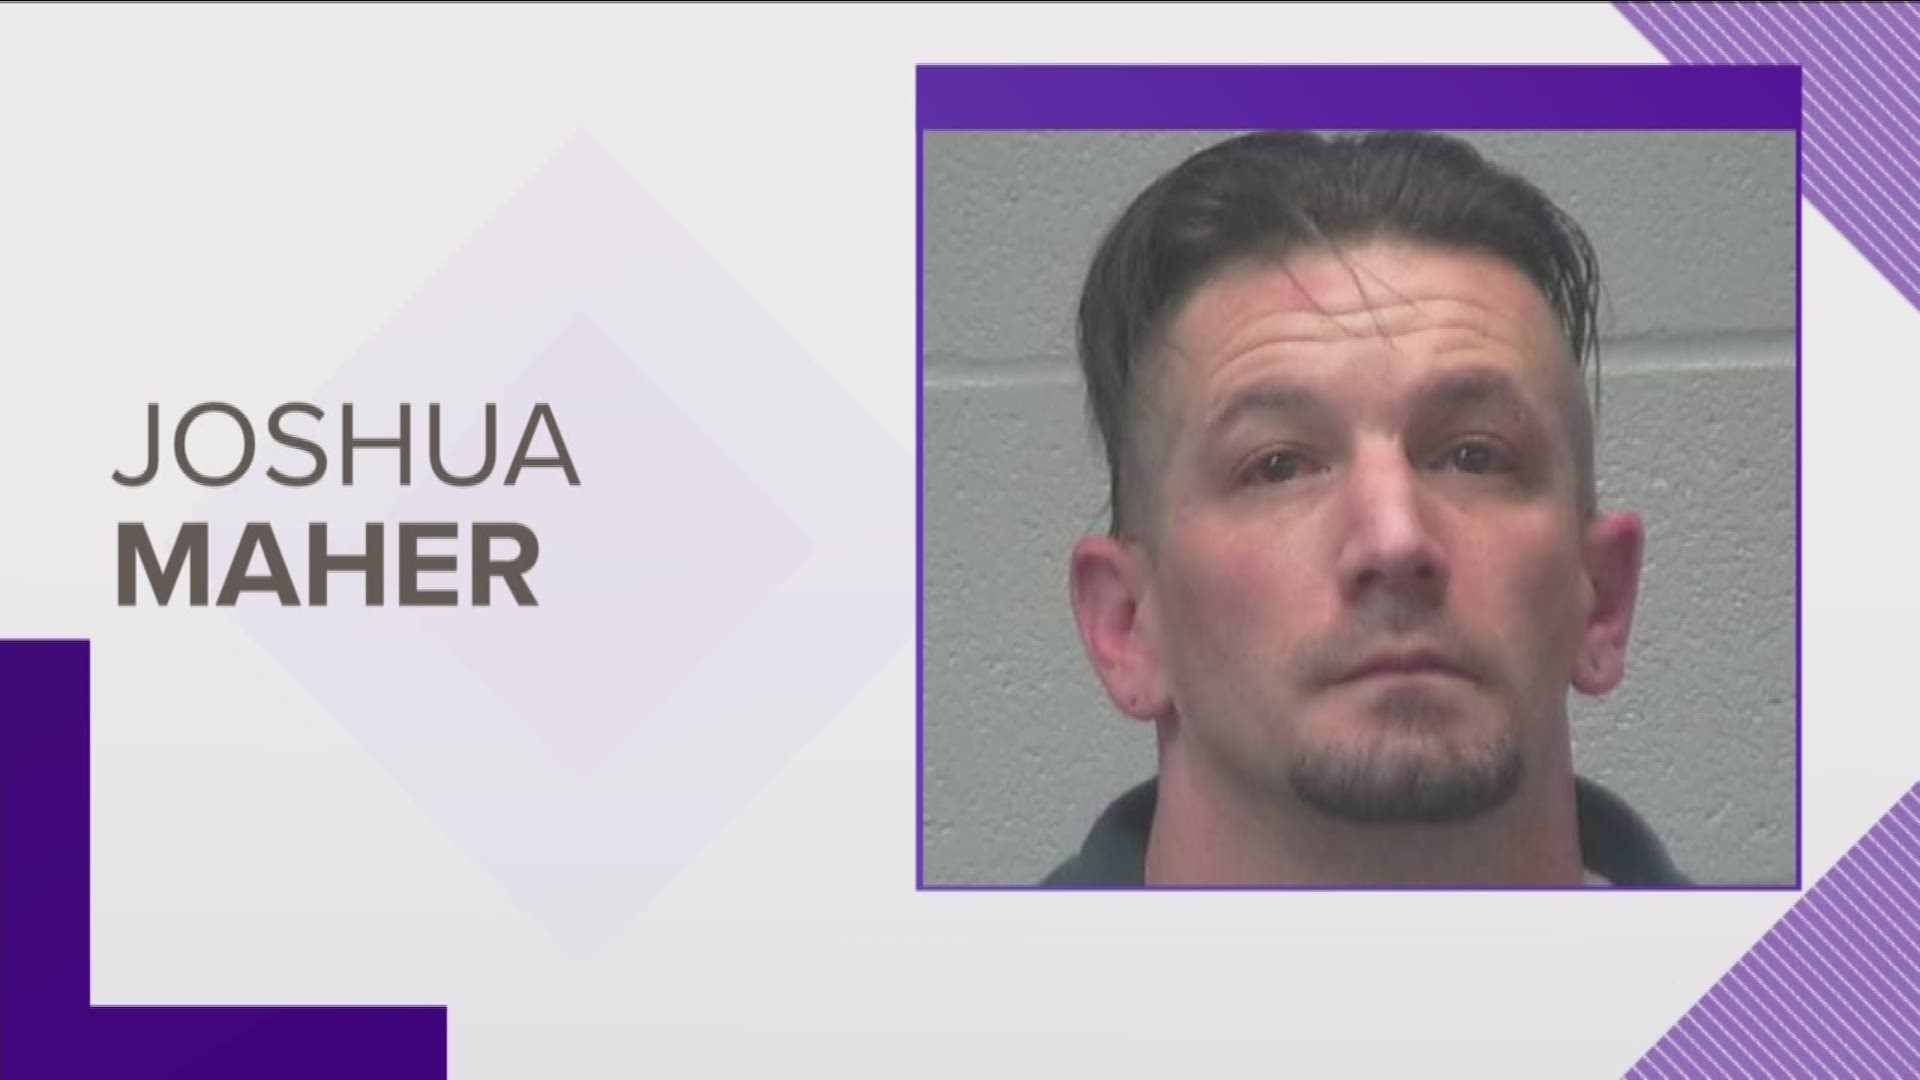 Deputies with the Grant County Sheriff's office are looking for 34-year-old Joshua Maher. They say he assaulted a courthouse security officer in Ephrata this morning - then ran away.